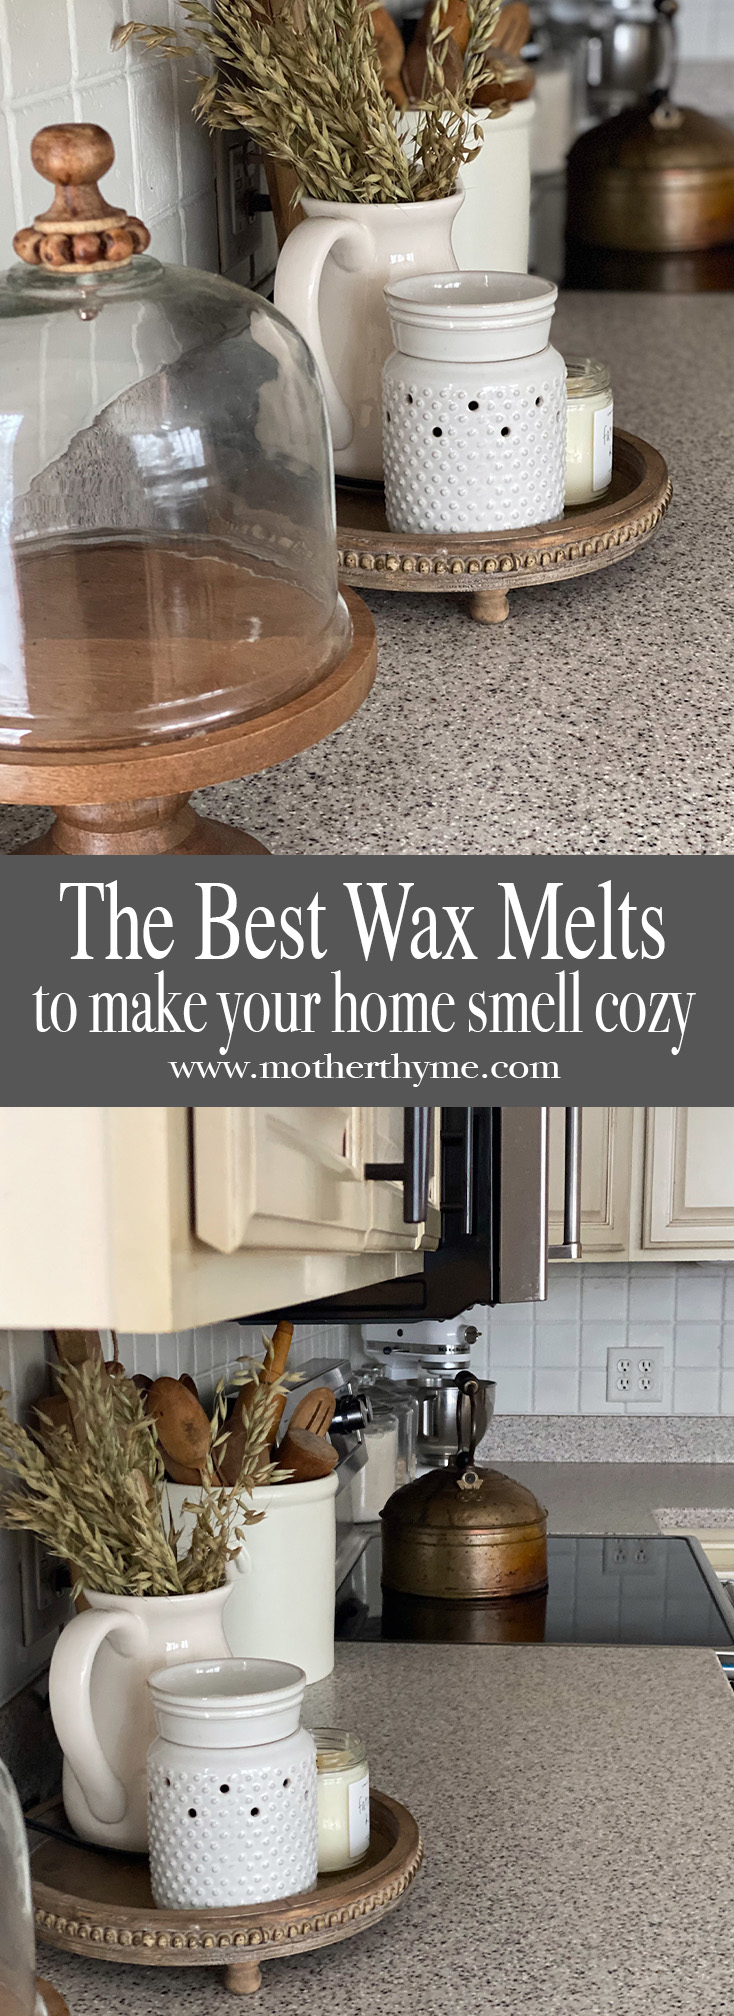 The Best Wax Melts To Make Your Home Smell Cozy